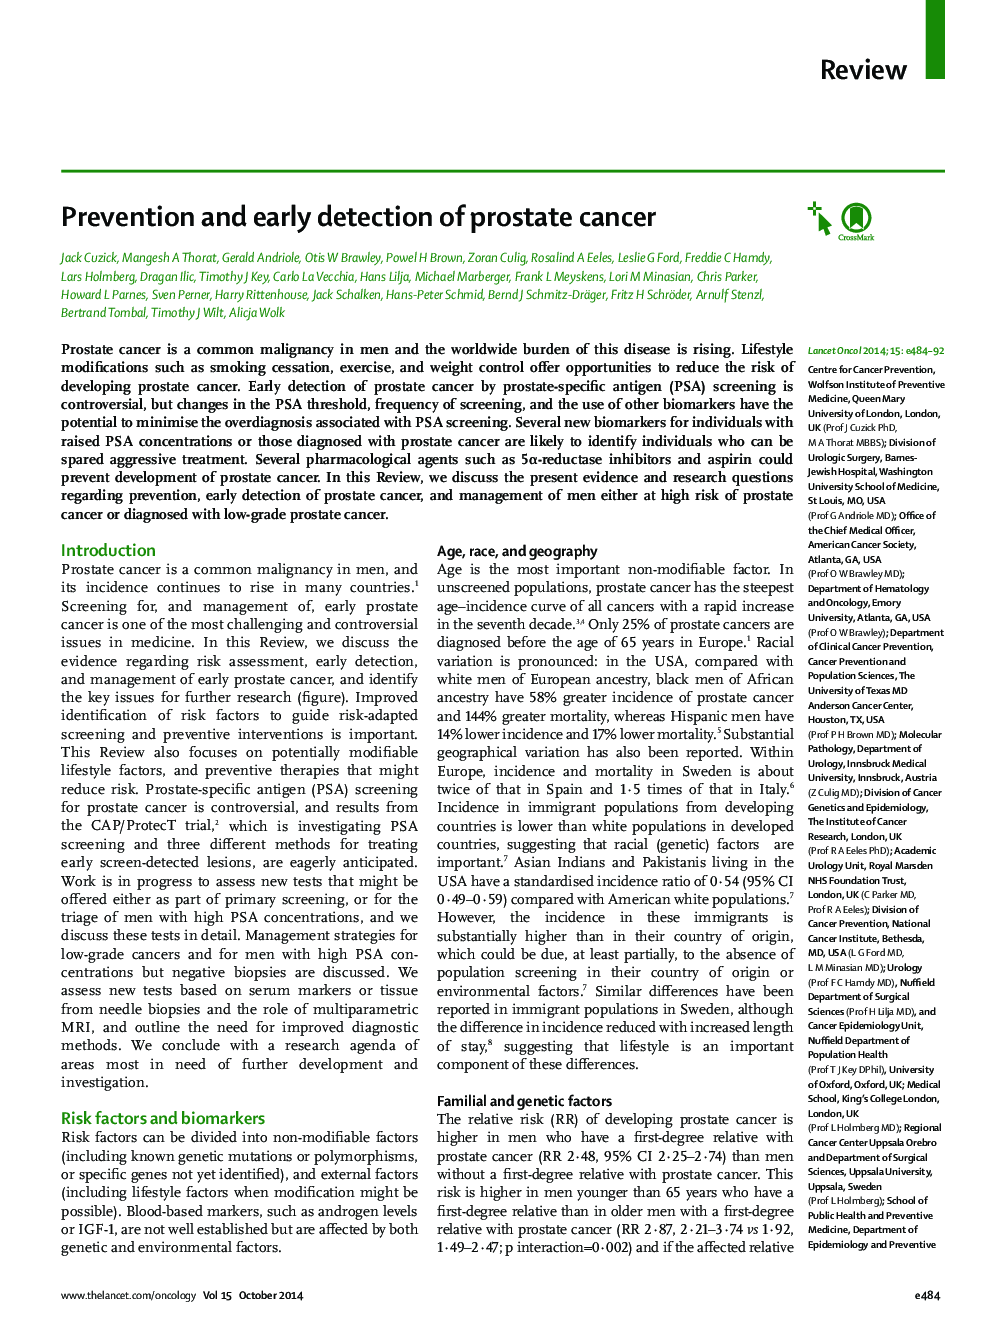 Prevention and early detection of prostate cancer